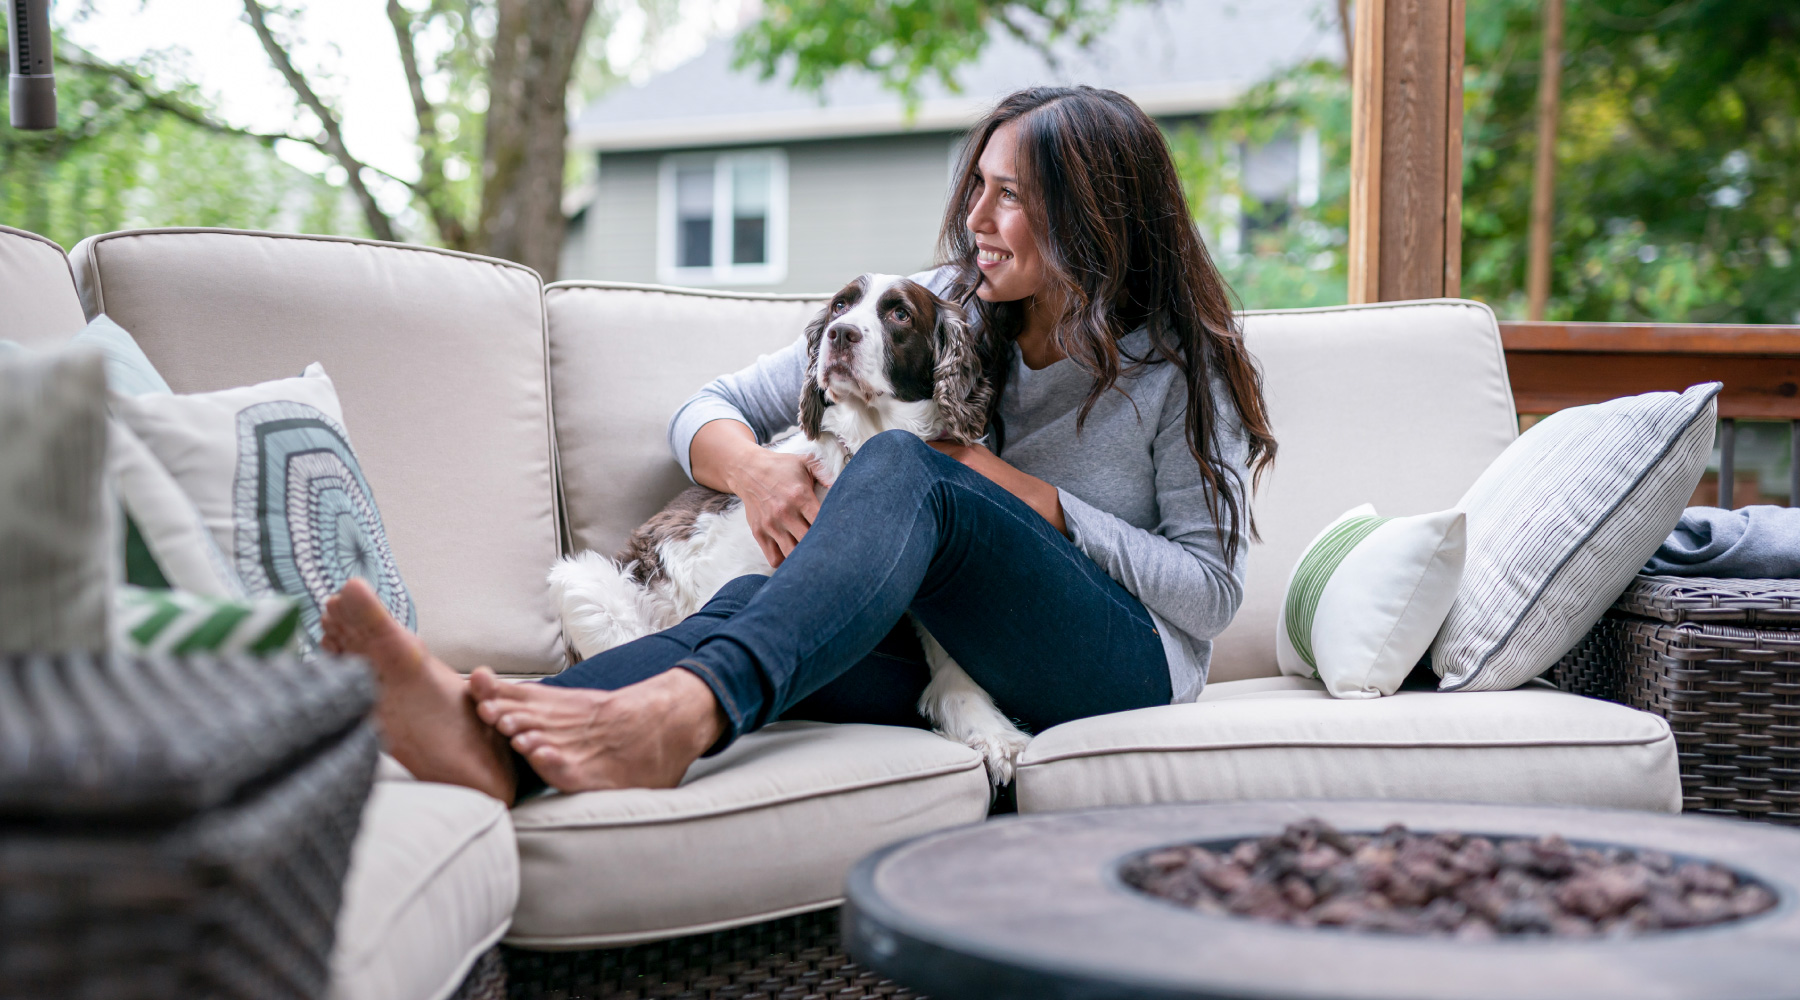 Young woman and dog relaxing on couch